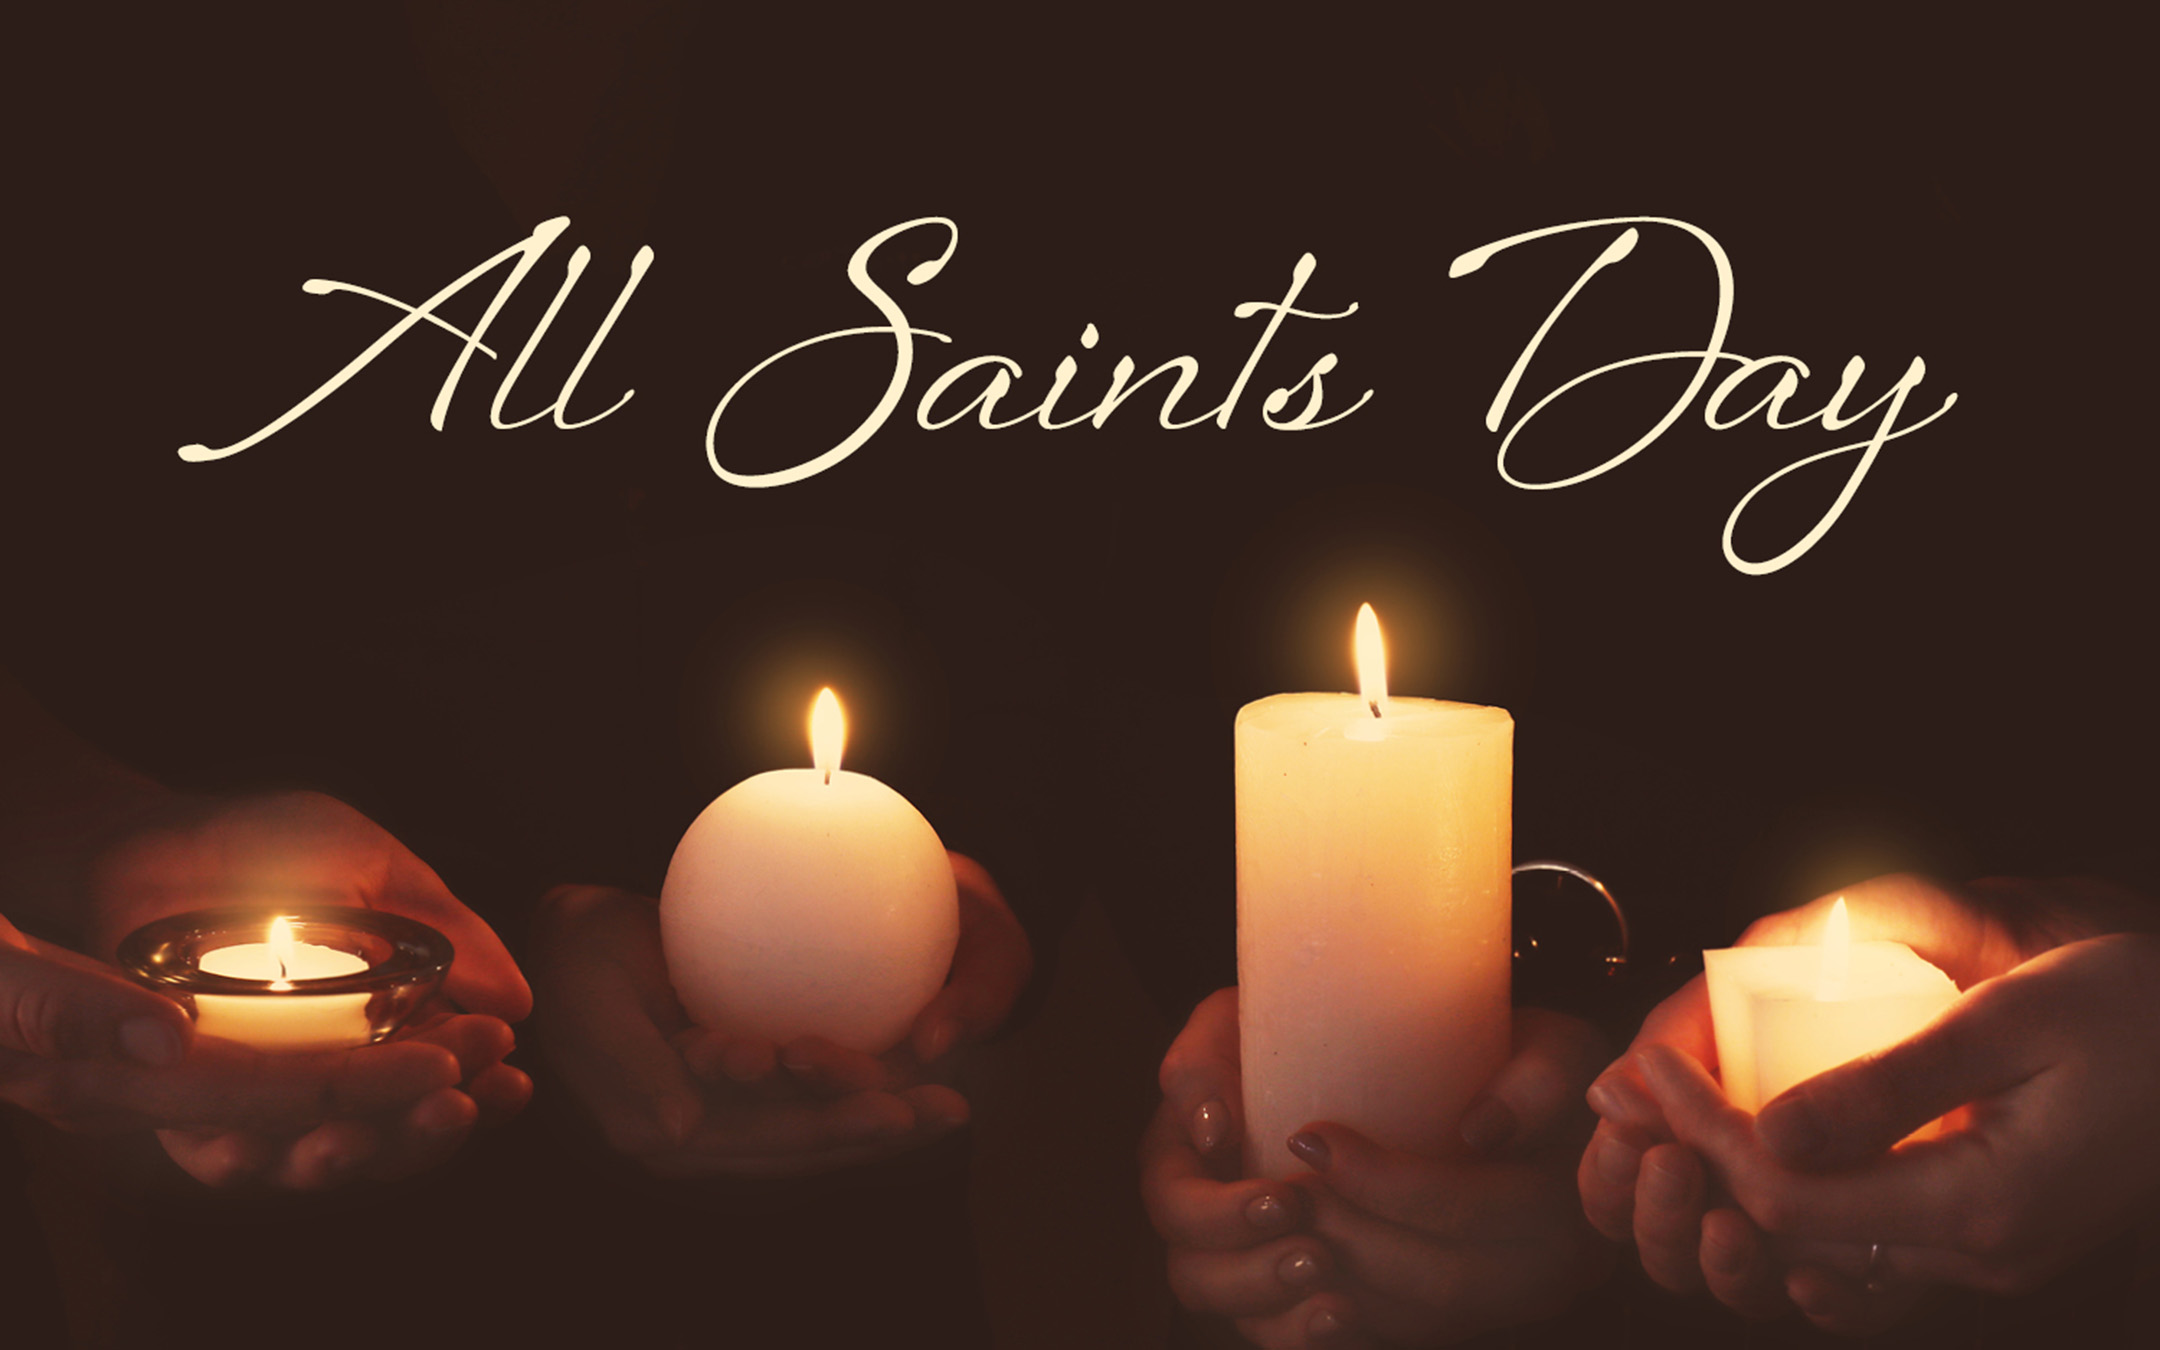 all saints day background